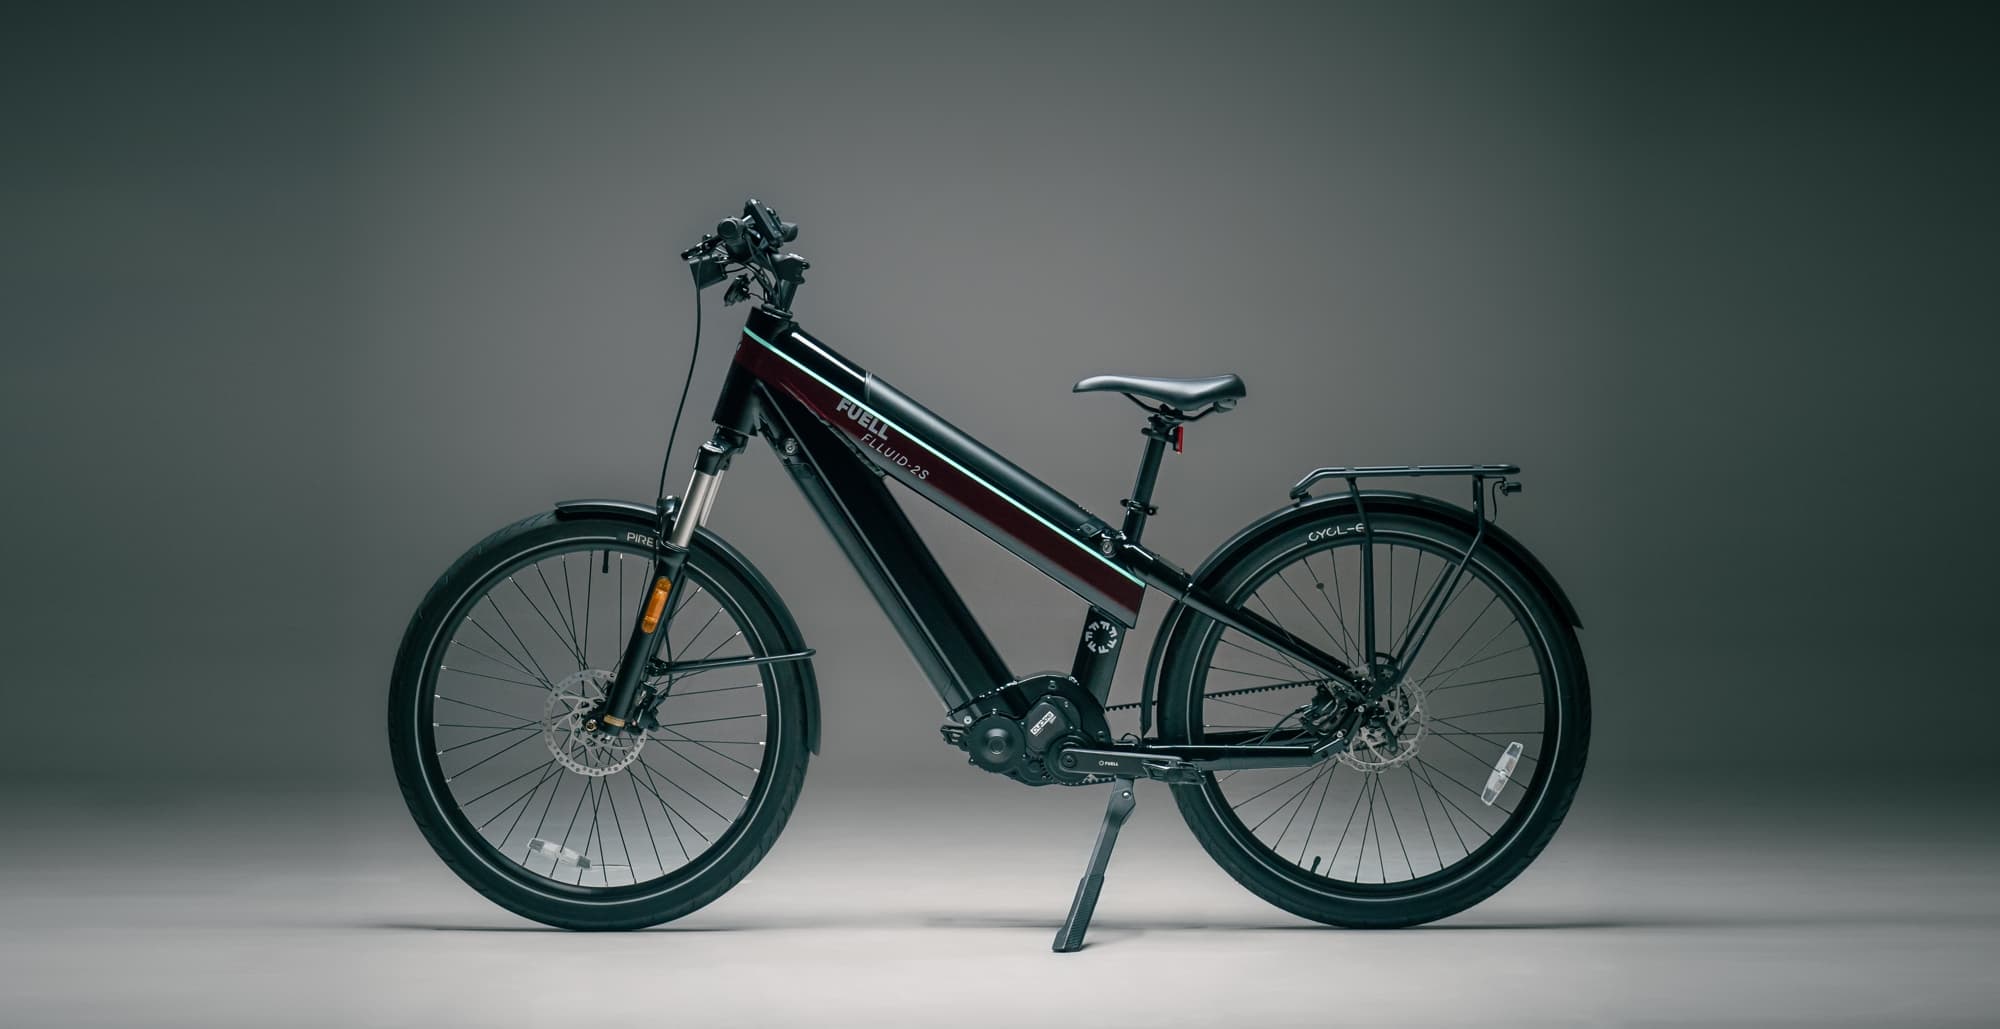 These are the longestrange electric bikes you can buy right now